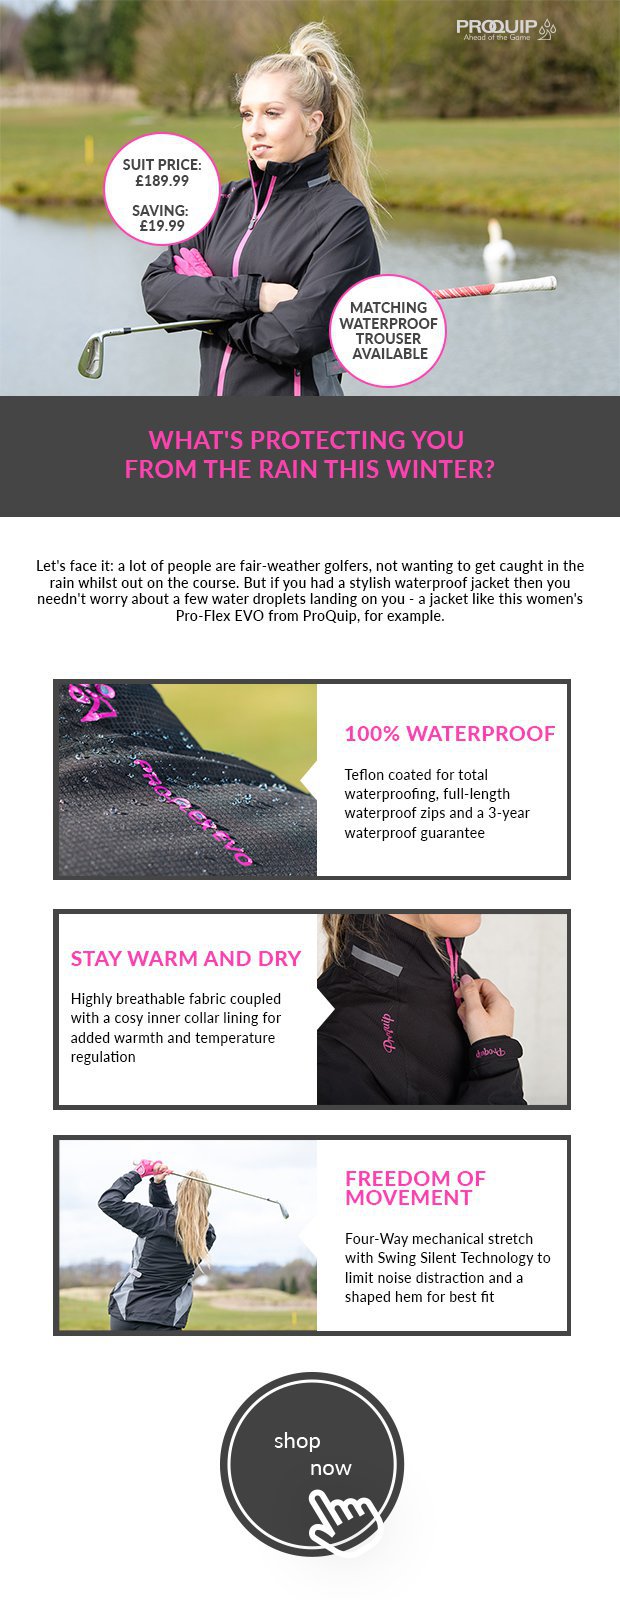 Let's face it: a lot of people are fair-weather golfers, not wanting to get caught in therain whilst out on the course. But if you had a stylish waterproof jacket then you needn't worry about a few water droplets landing on you - a jacket like this women's Pro-Flex EVO from ProQuip, for example.